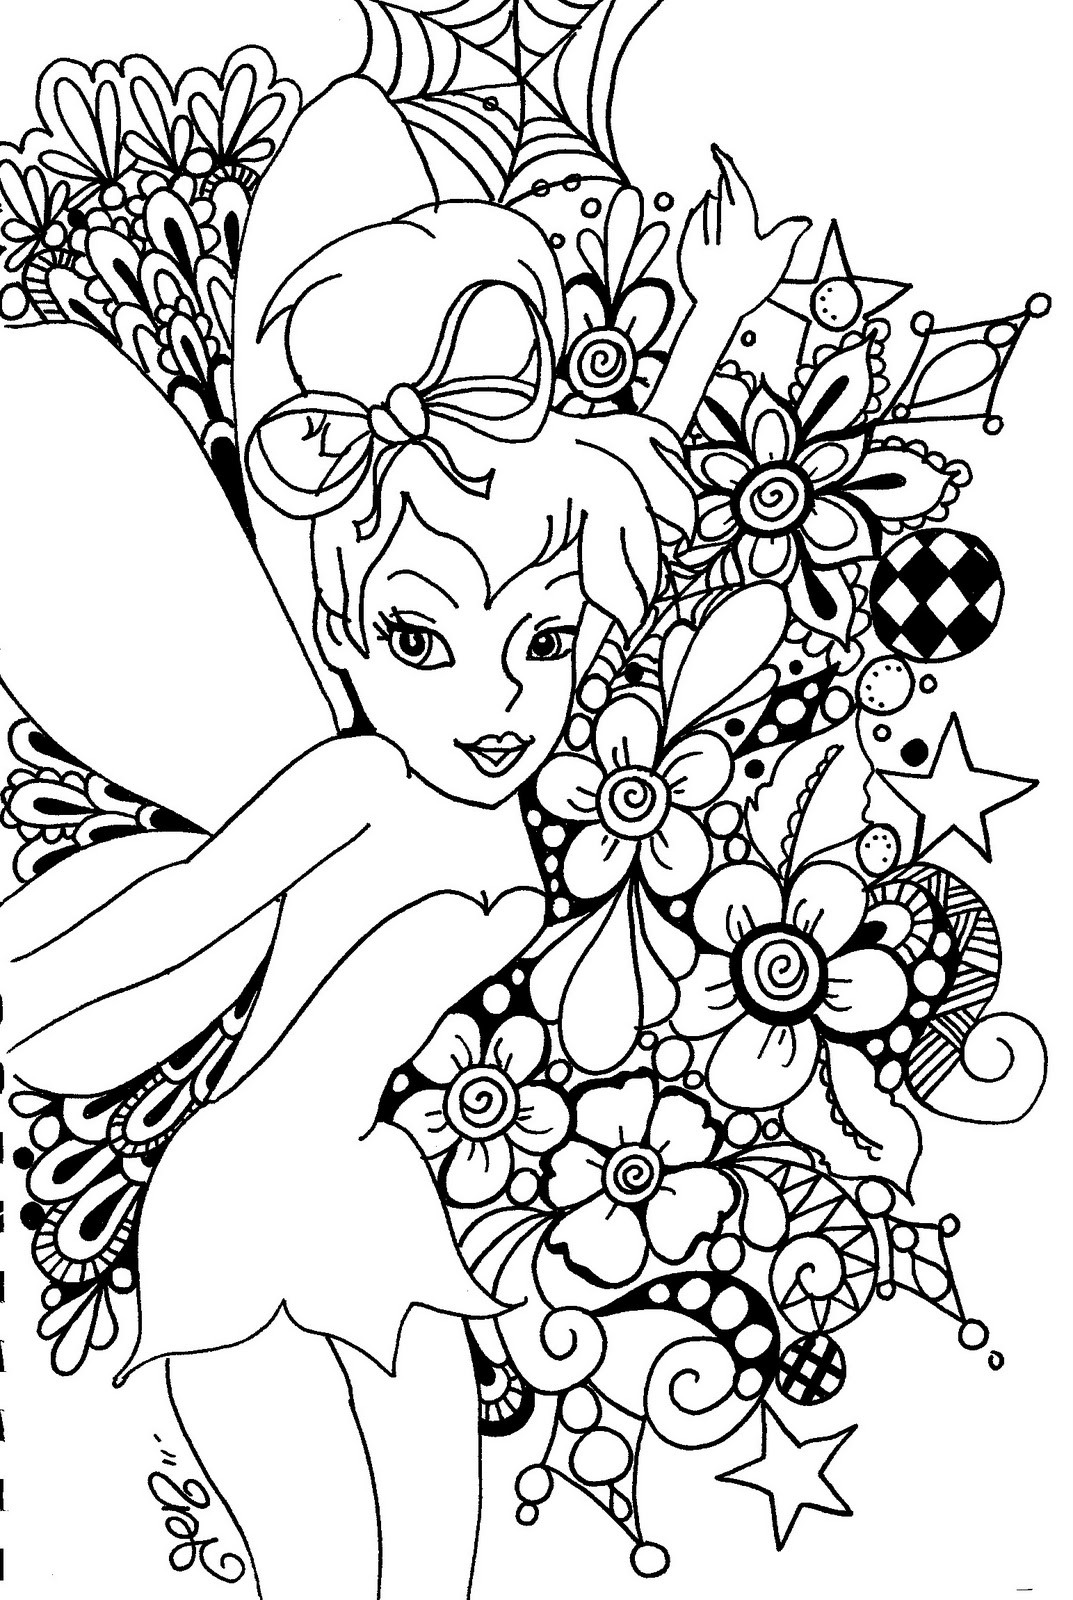 Coloring Pages For Adults Online
 FAIRY COLORING PAGES